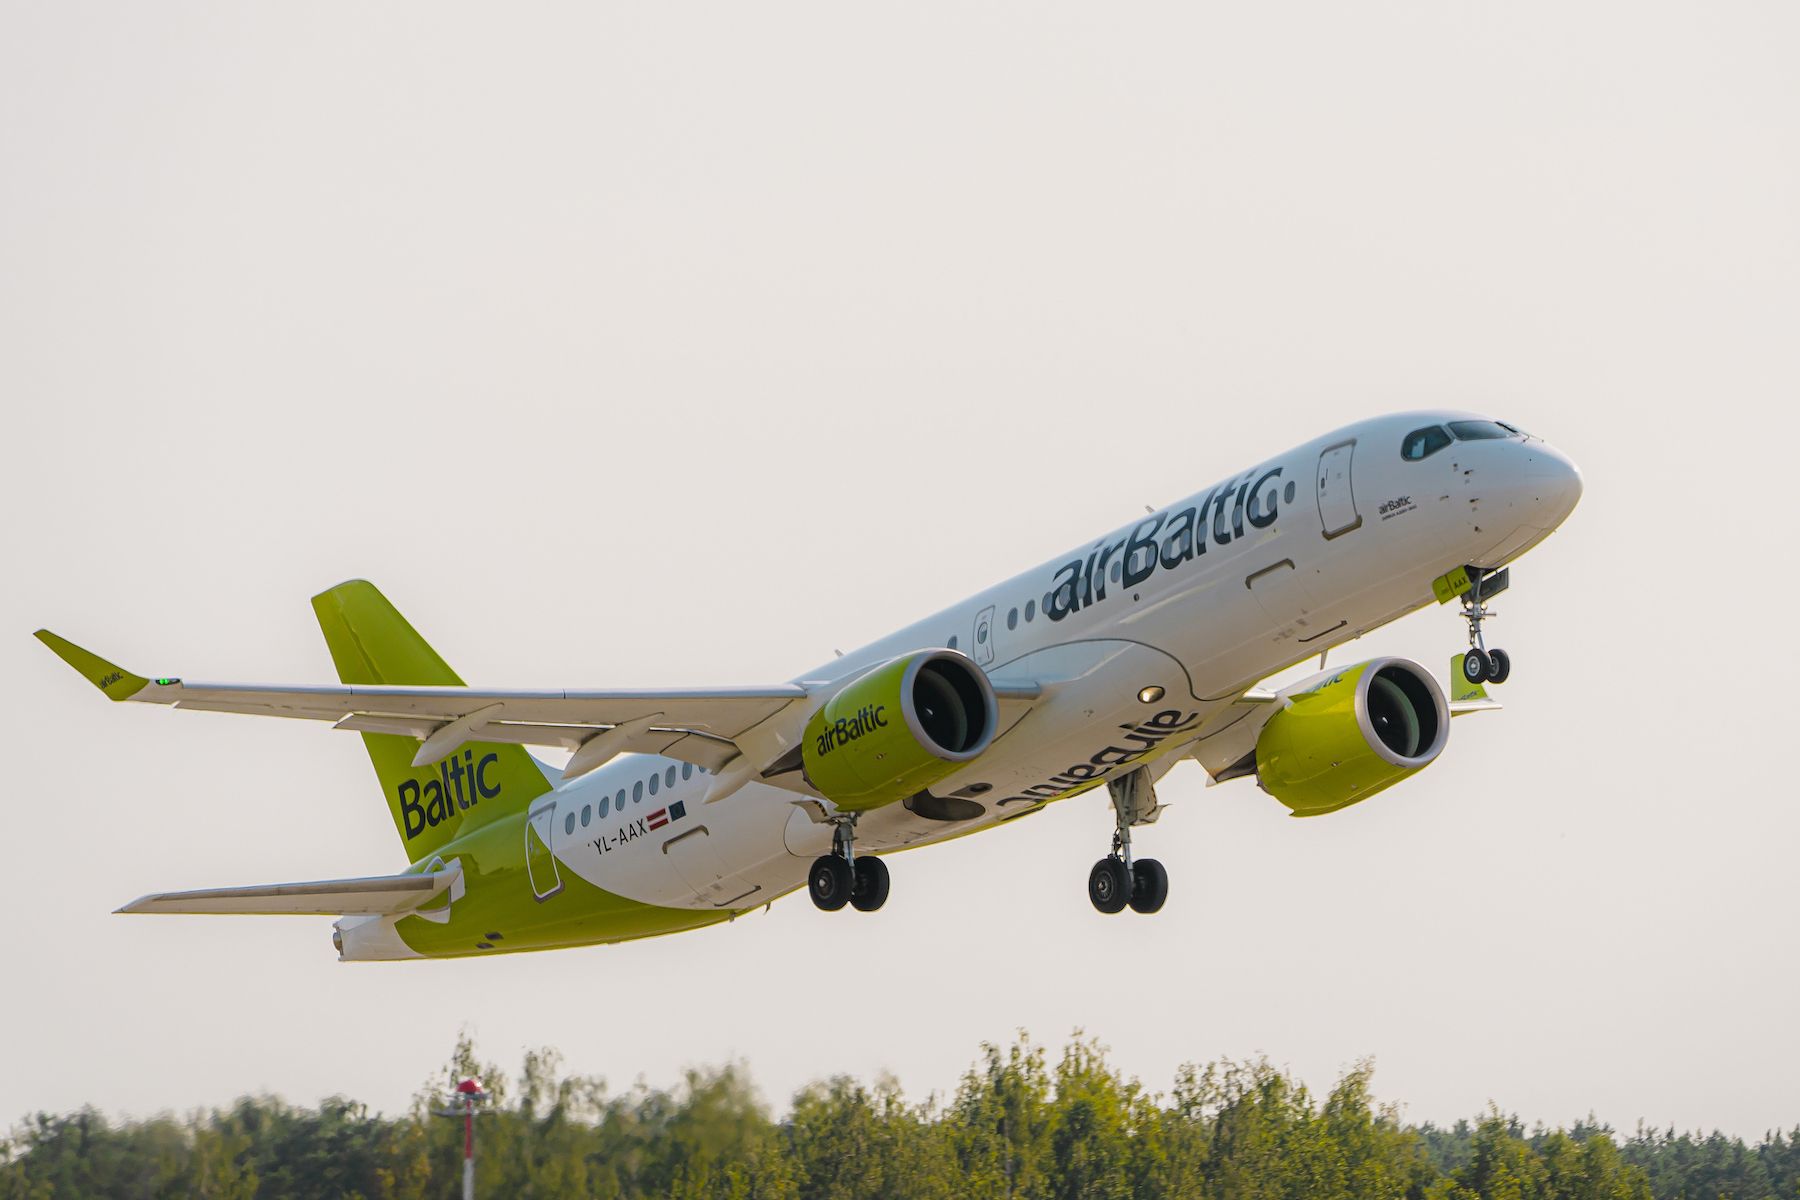 airBaltic Airbus A220-300